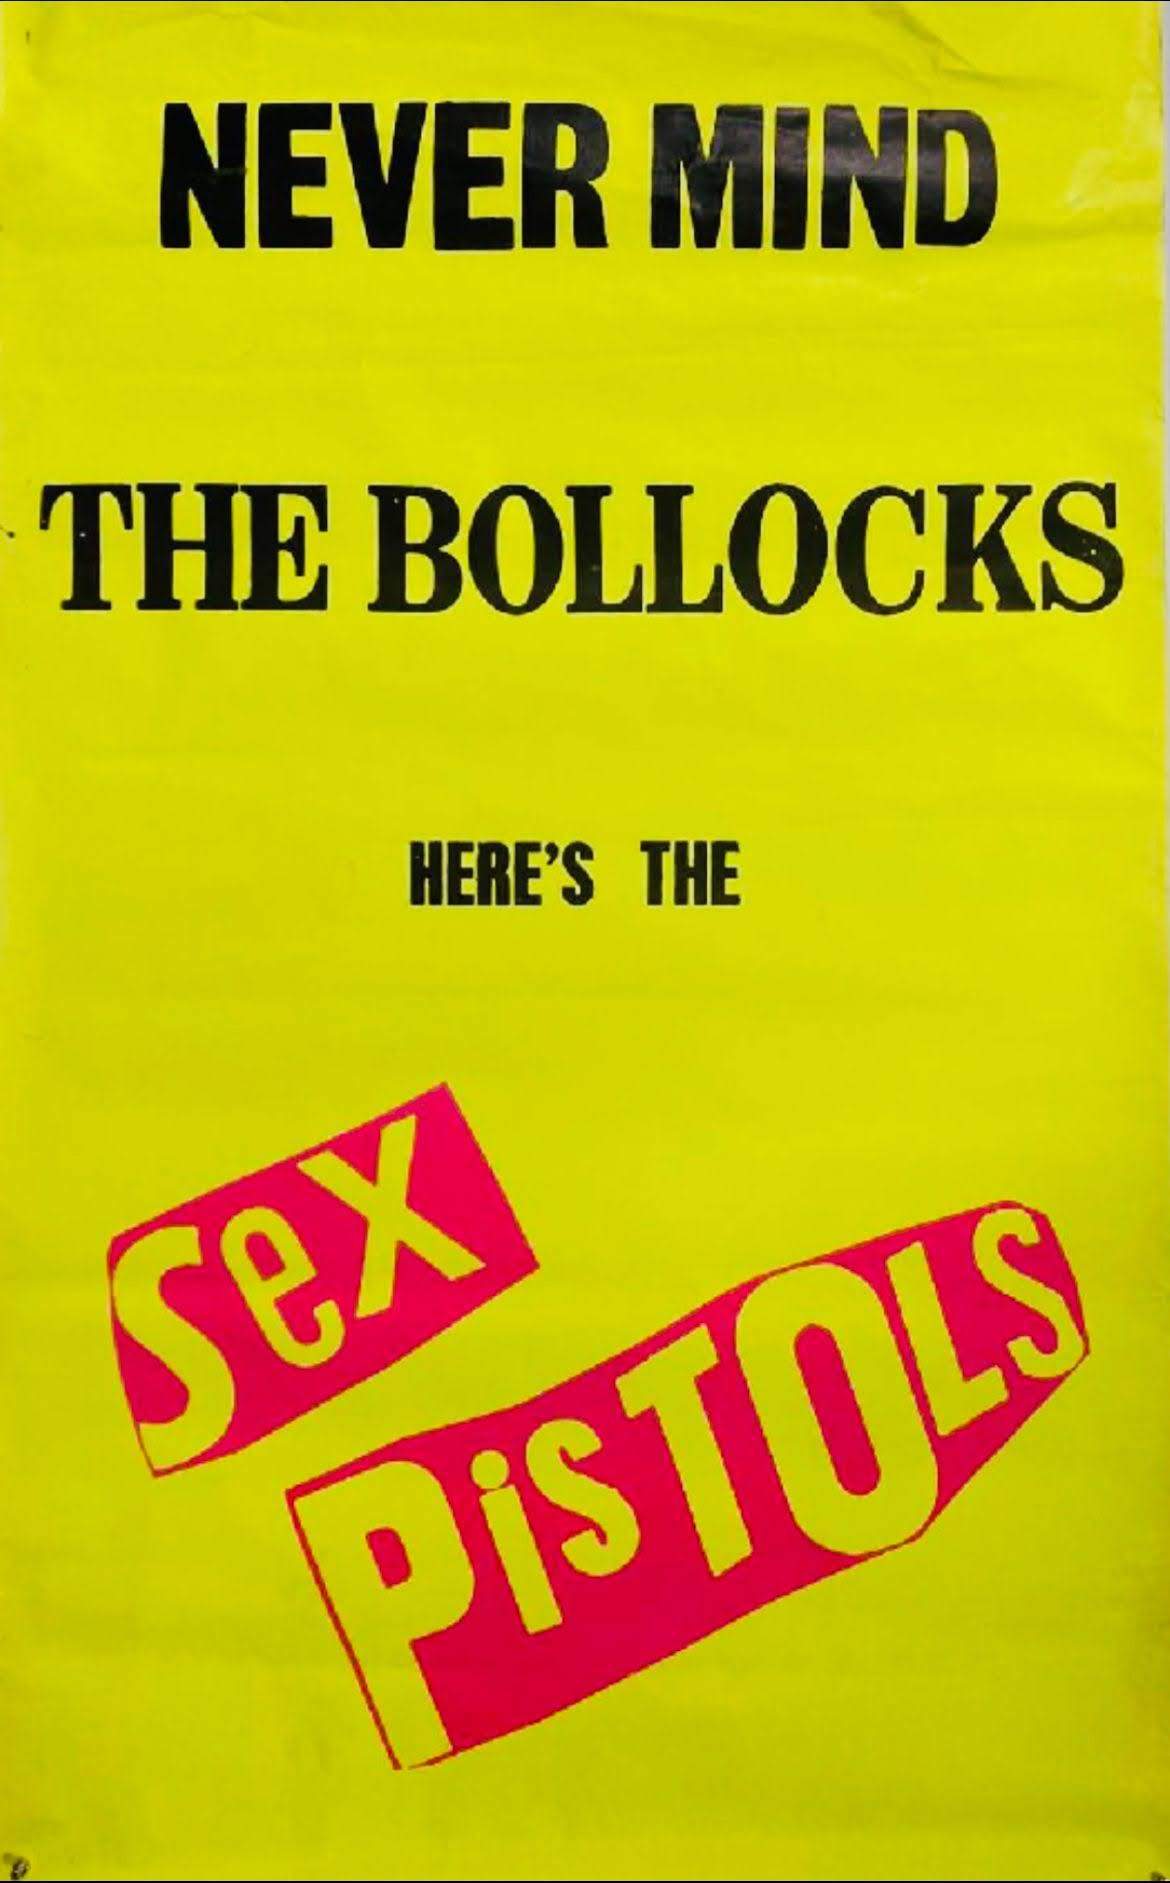 Nevermind the Bollocks - 1977 Poster